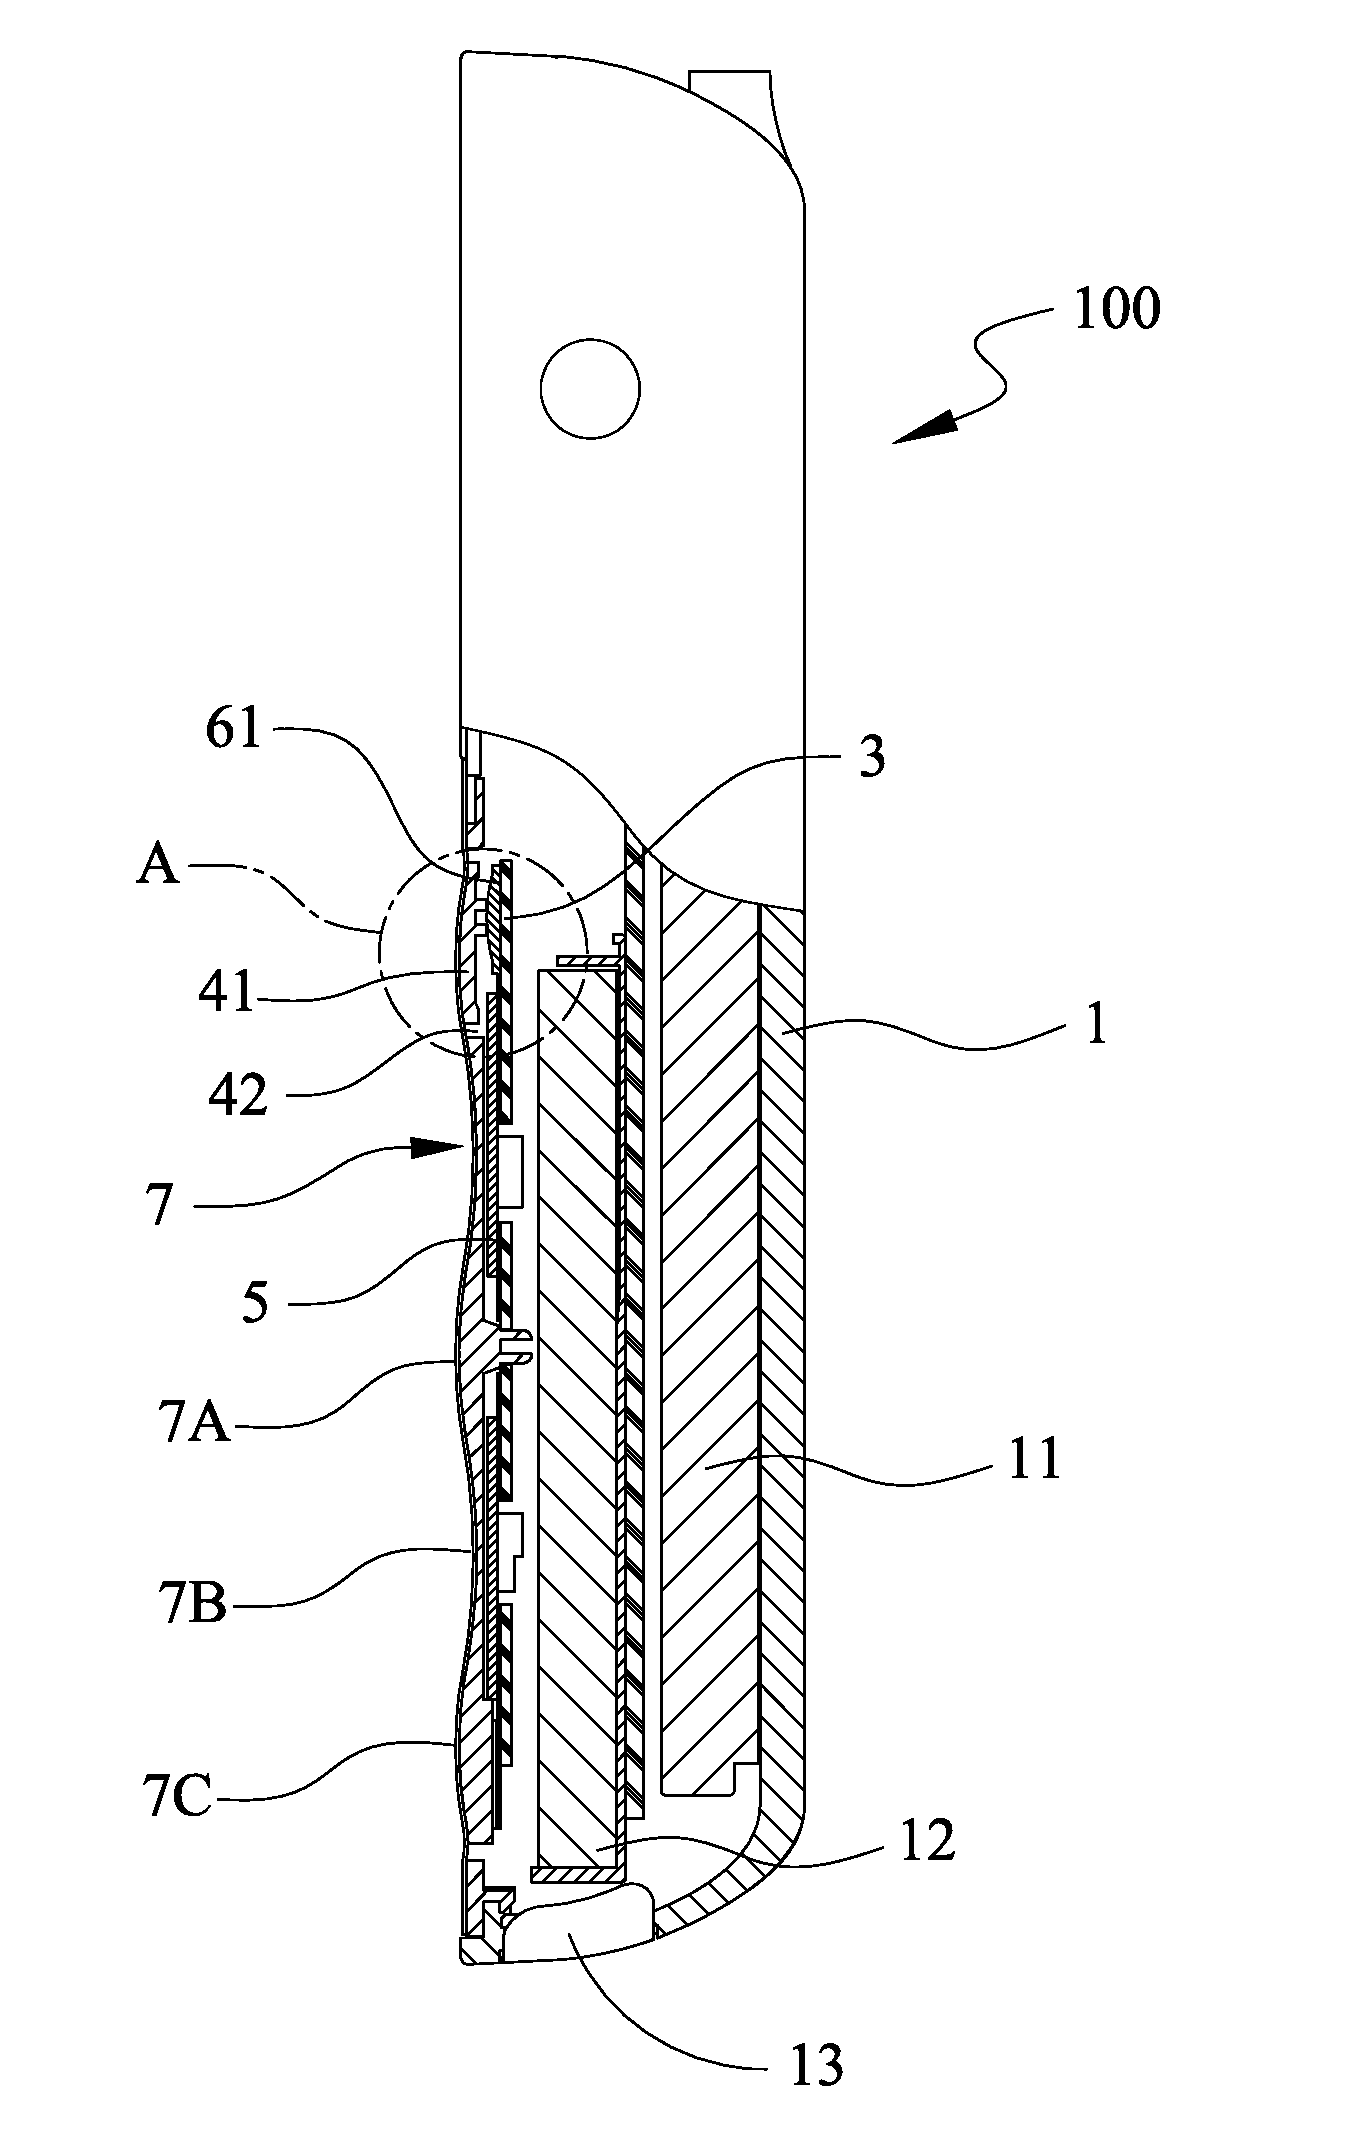 Digital audio/video playing device